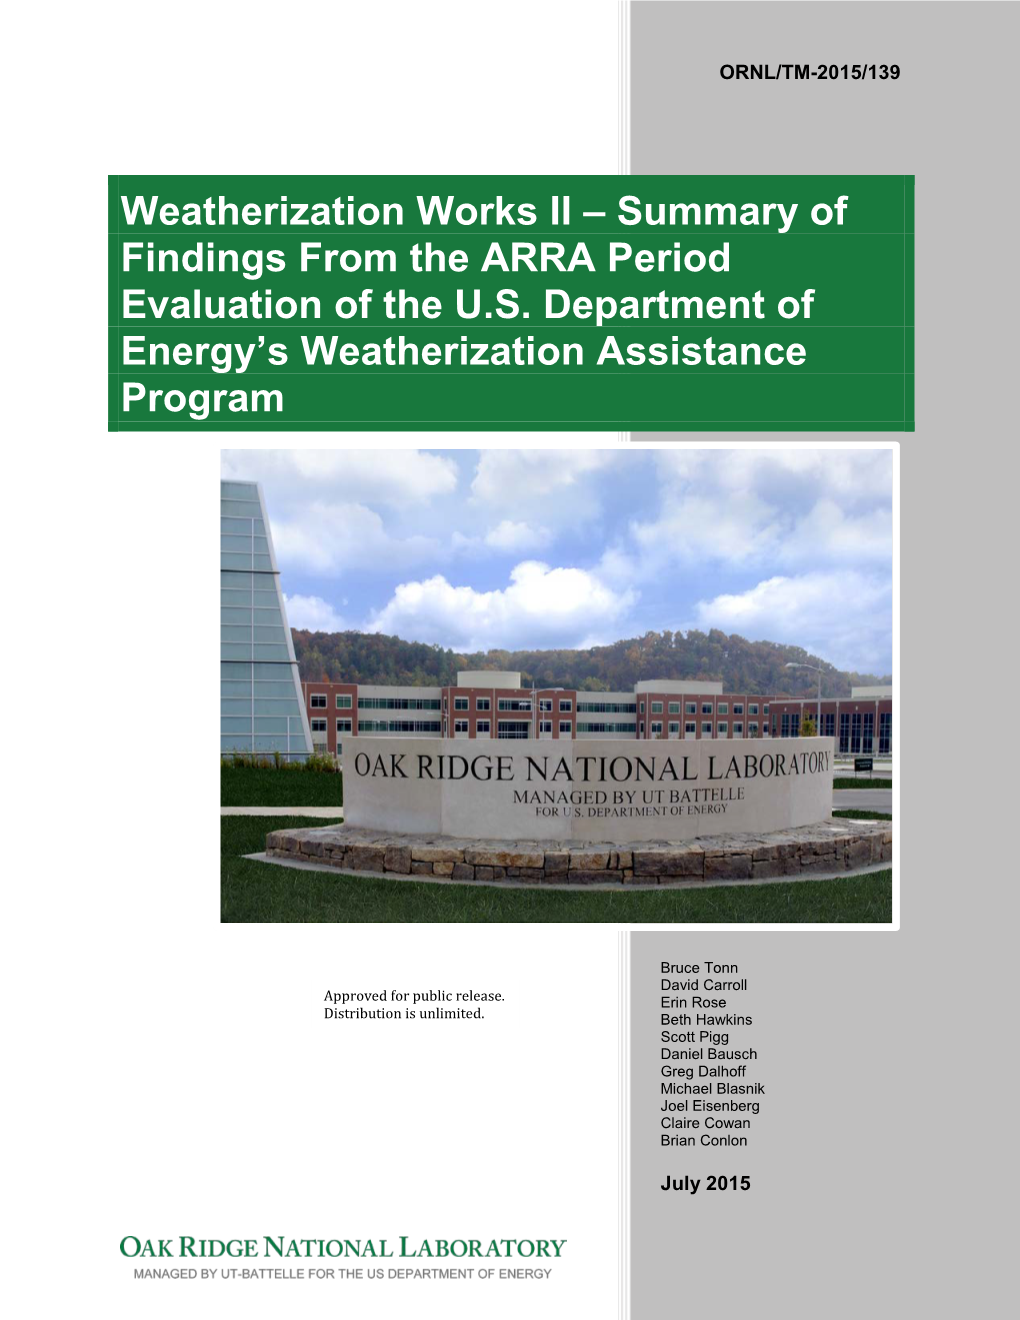 Weatherization Works II – Summary of Findings from the ARRA Period Evaluation of the U.S